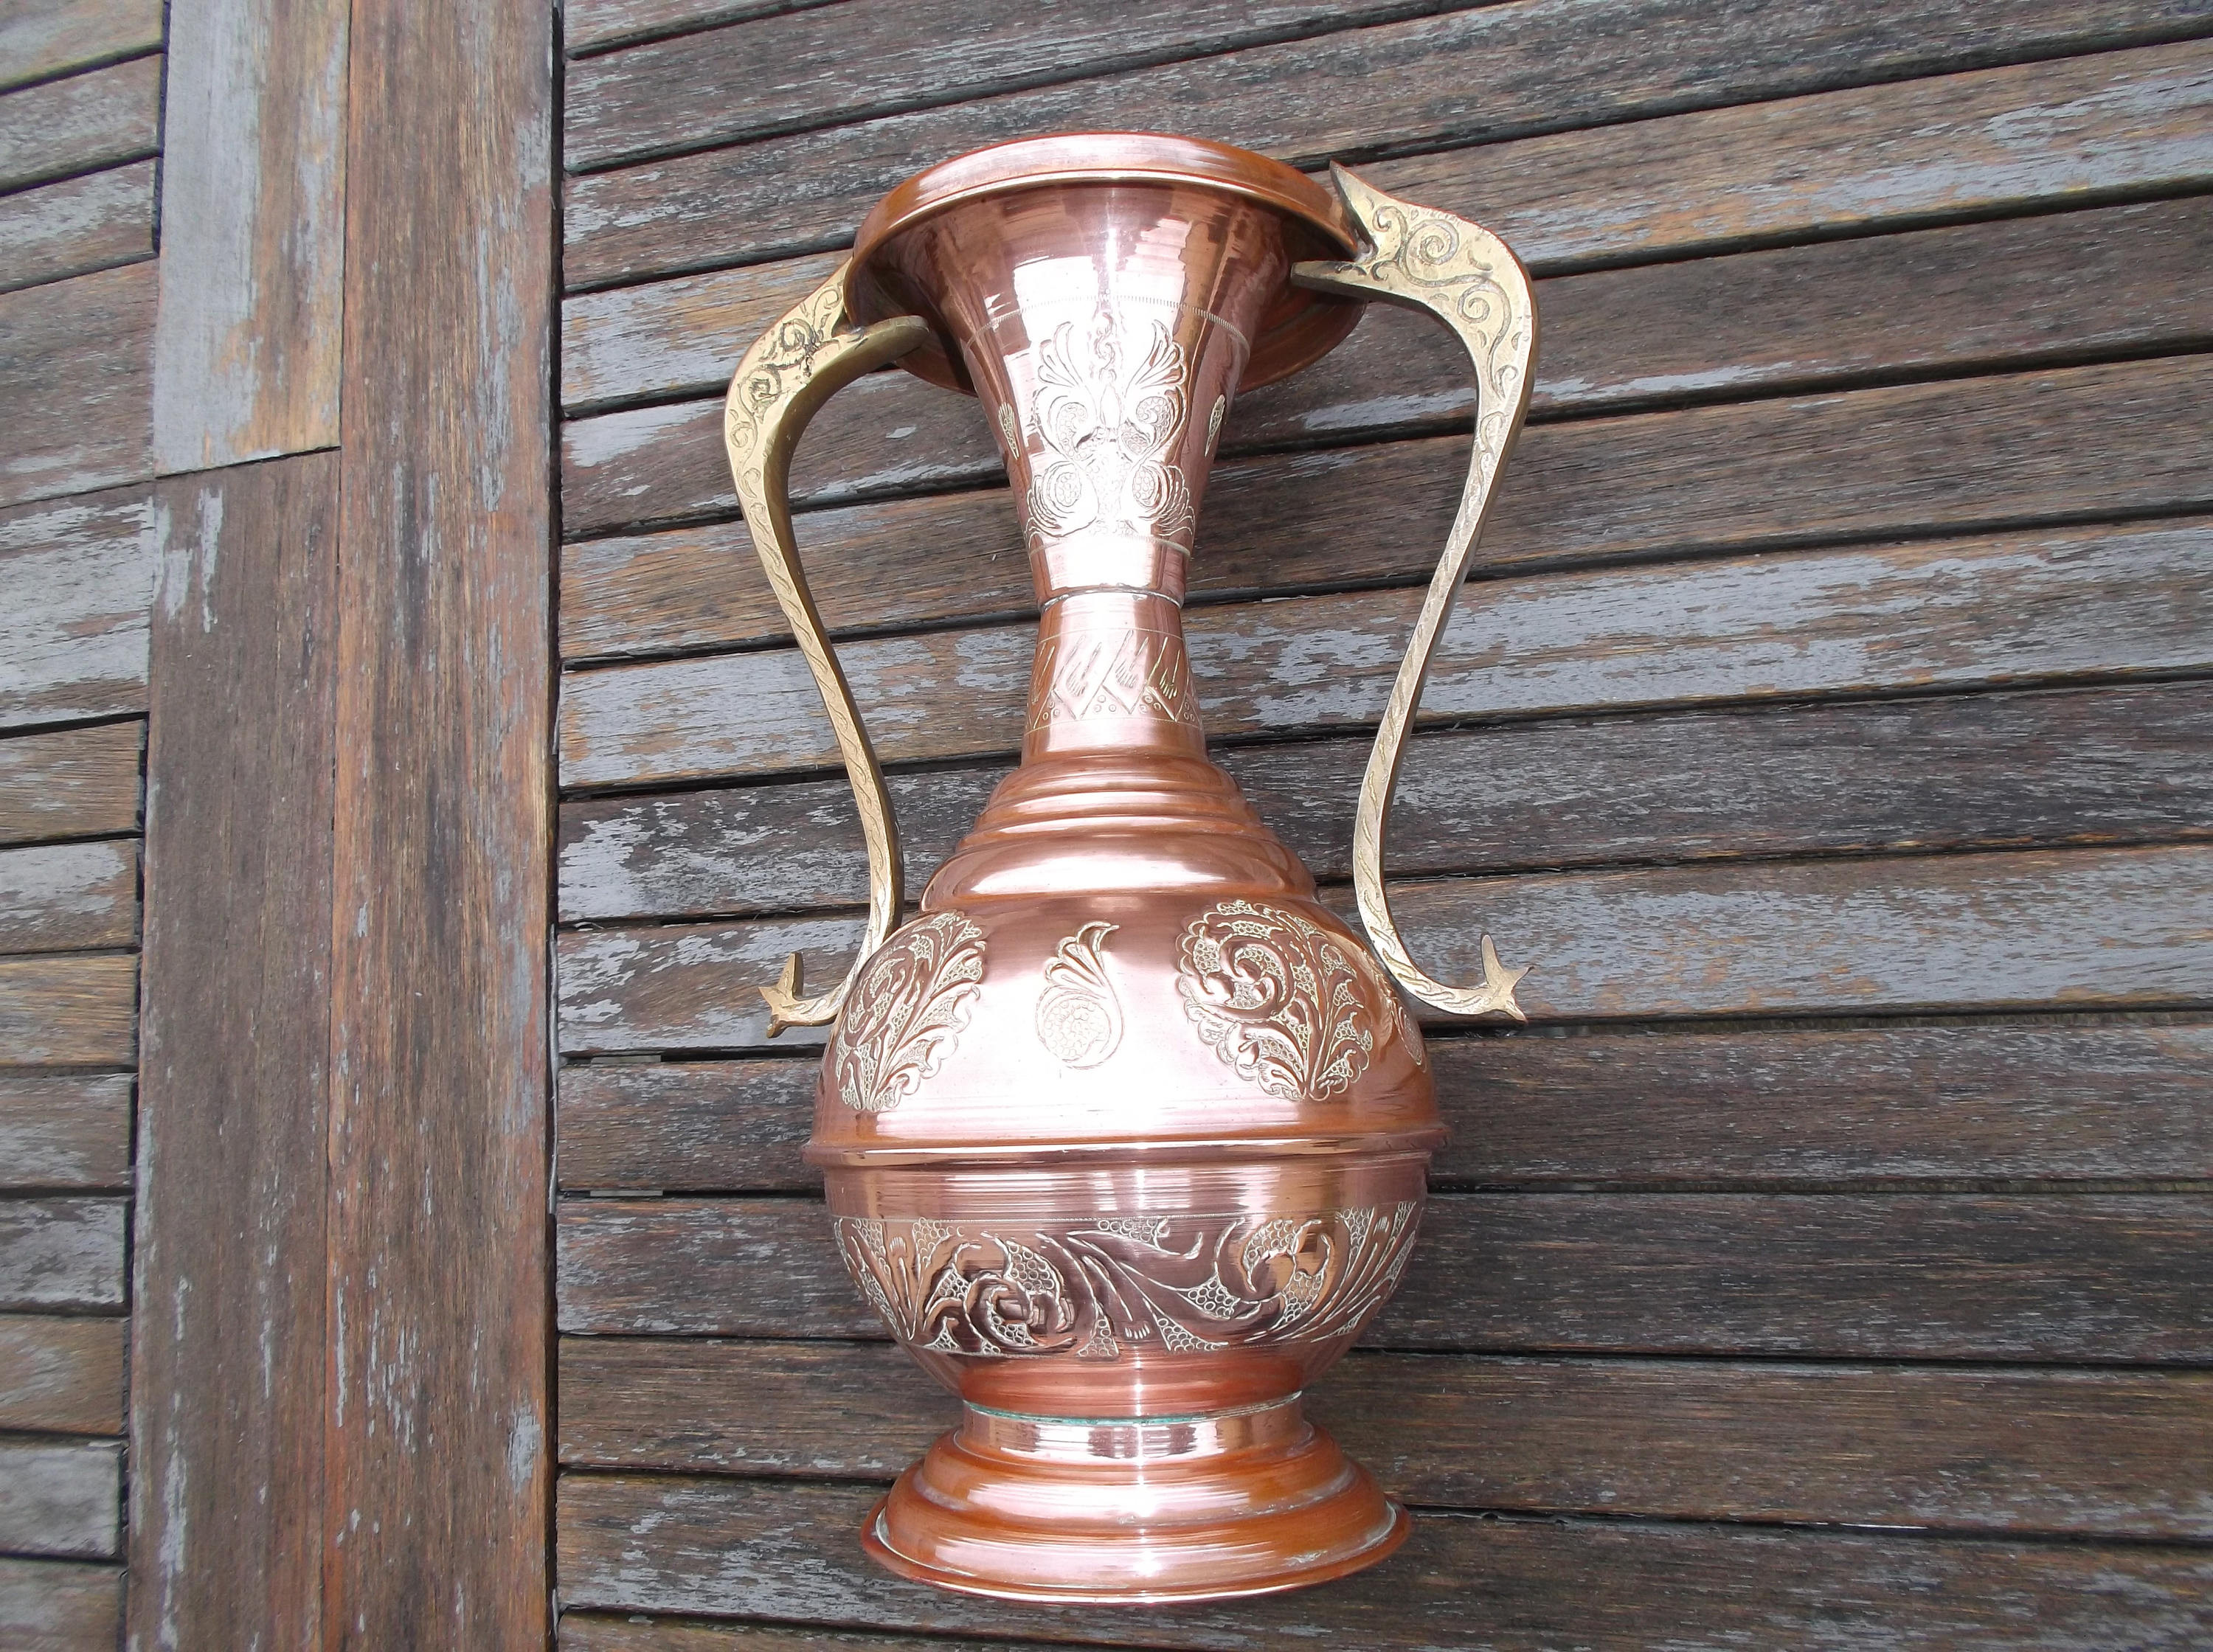 14 Ideal Antique Hammered Copper Vase 2024 free download antique hammered copper vase of amphora vase copper cut and brass cove antique moroccan etsy in dc29fc294c28ezoom